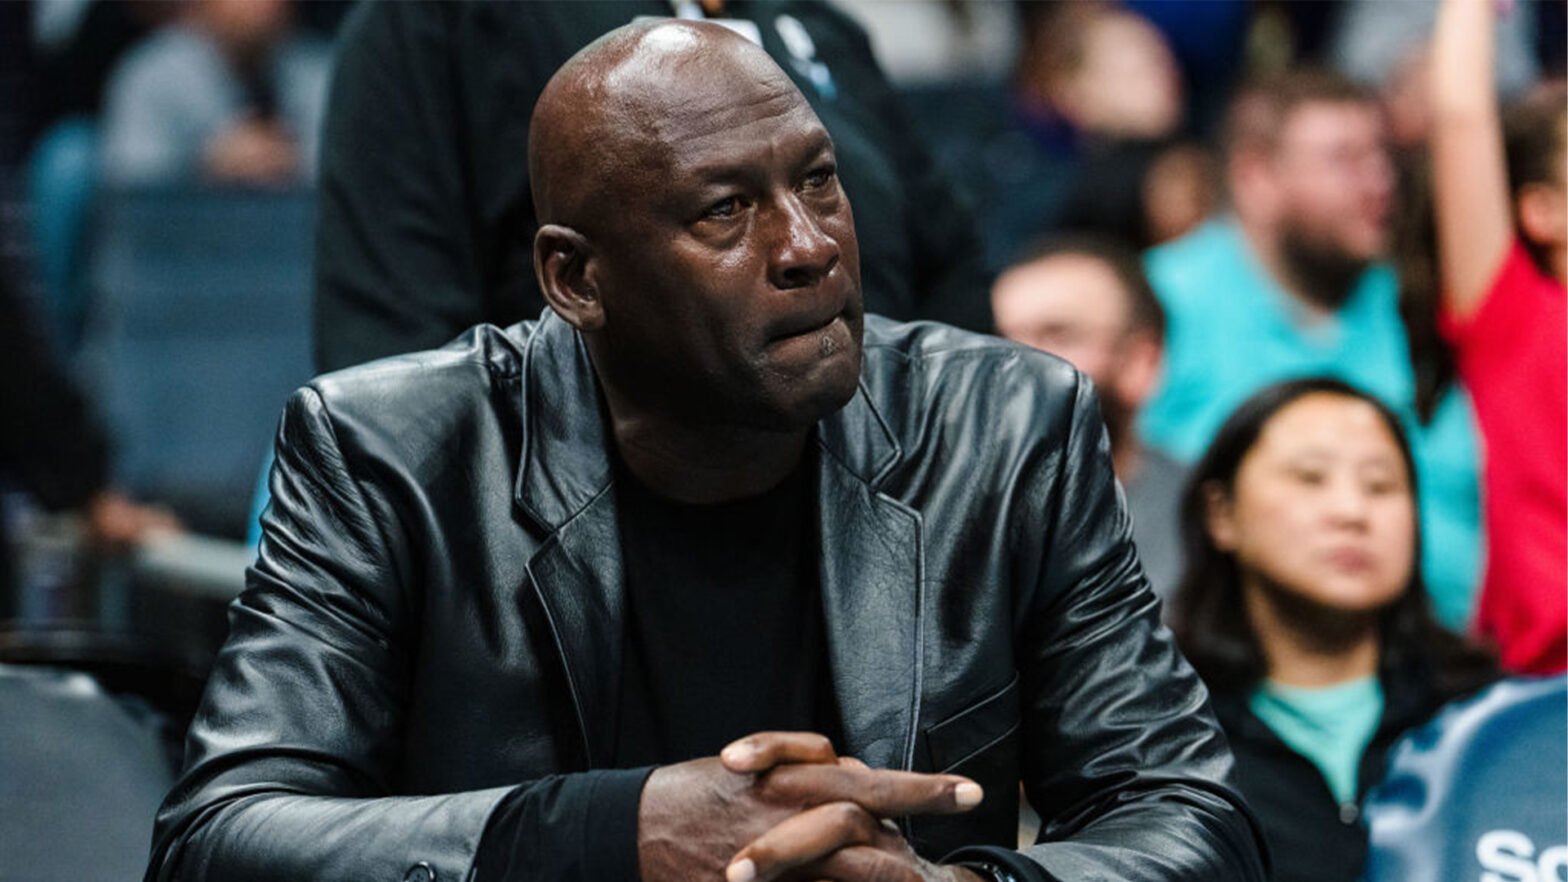 Michael Jordan's Net Worth Reportedly Increases To $3.5B After Selling Majority Stake In Charlotte Hornets